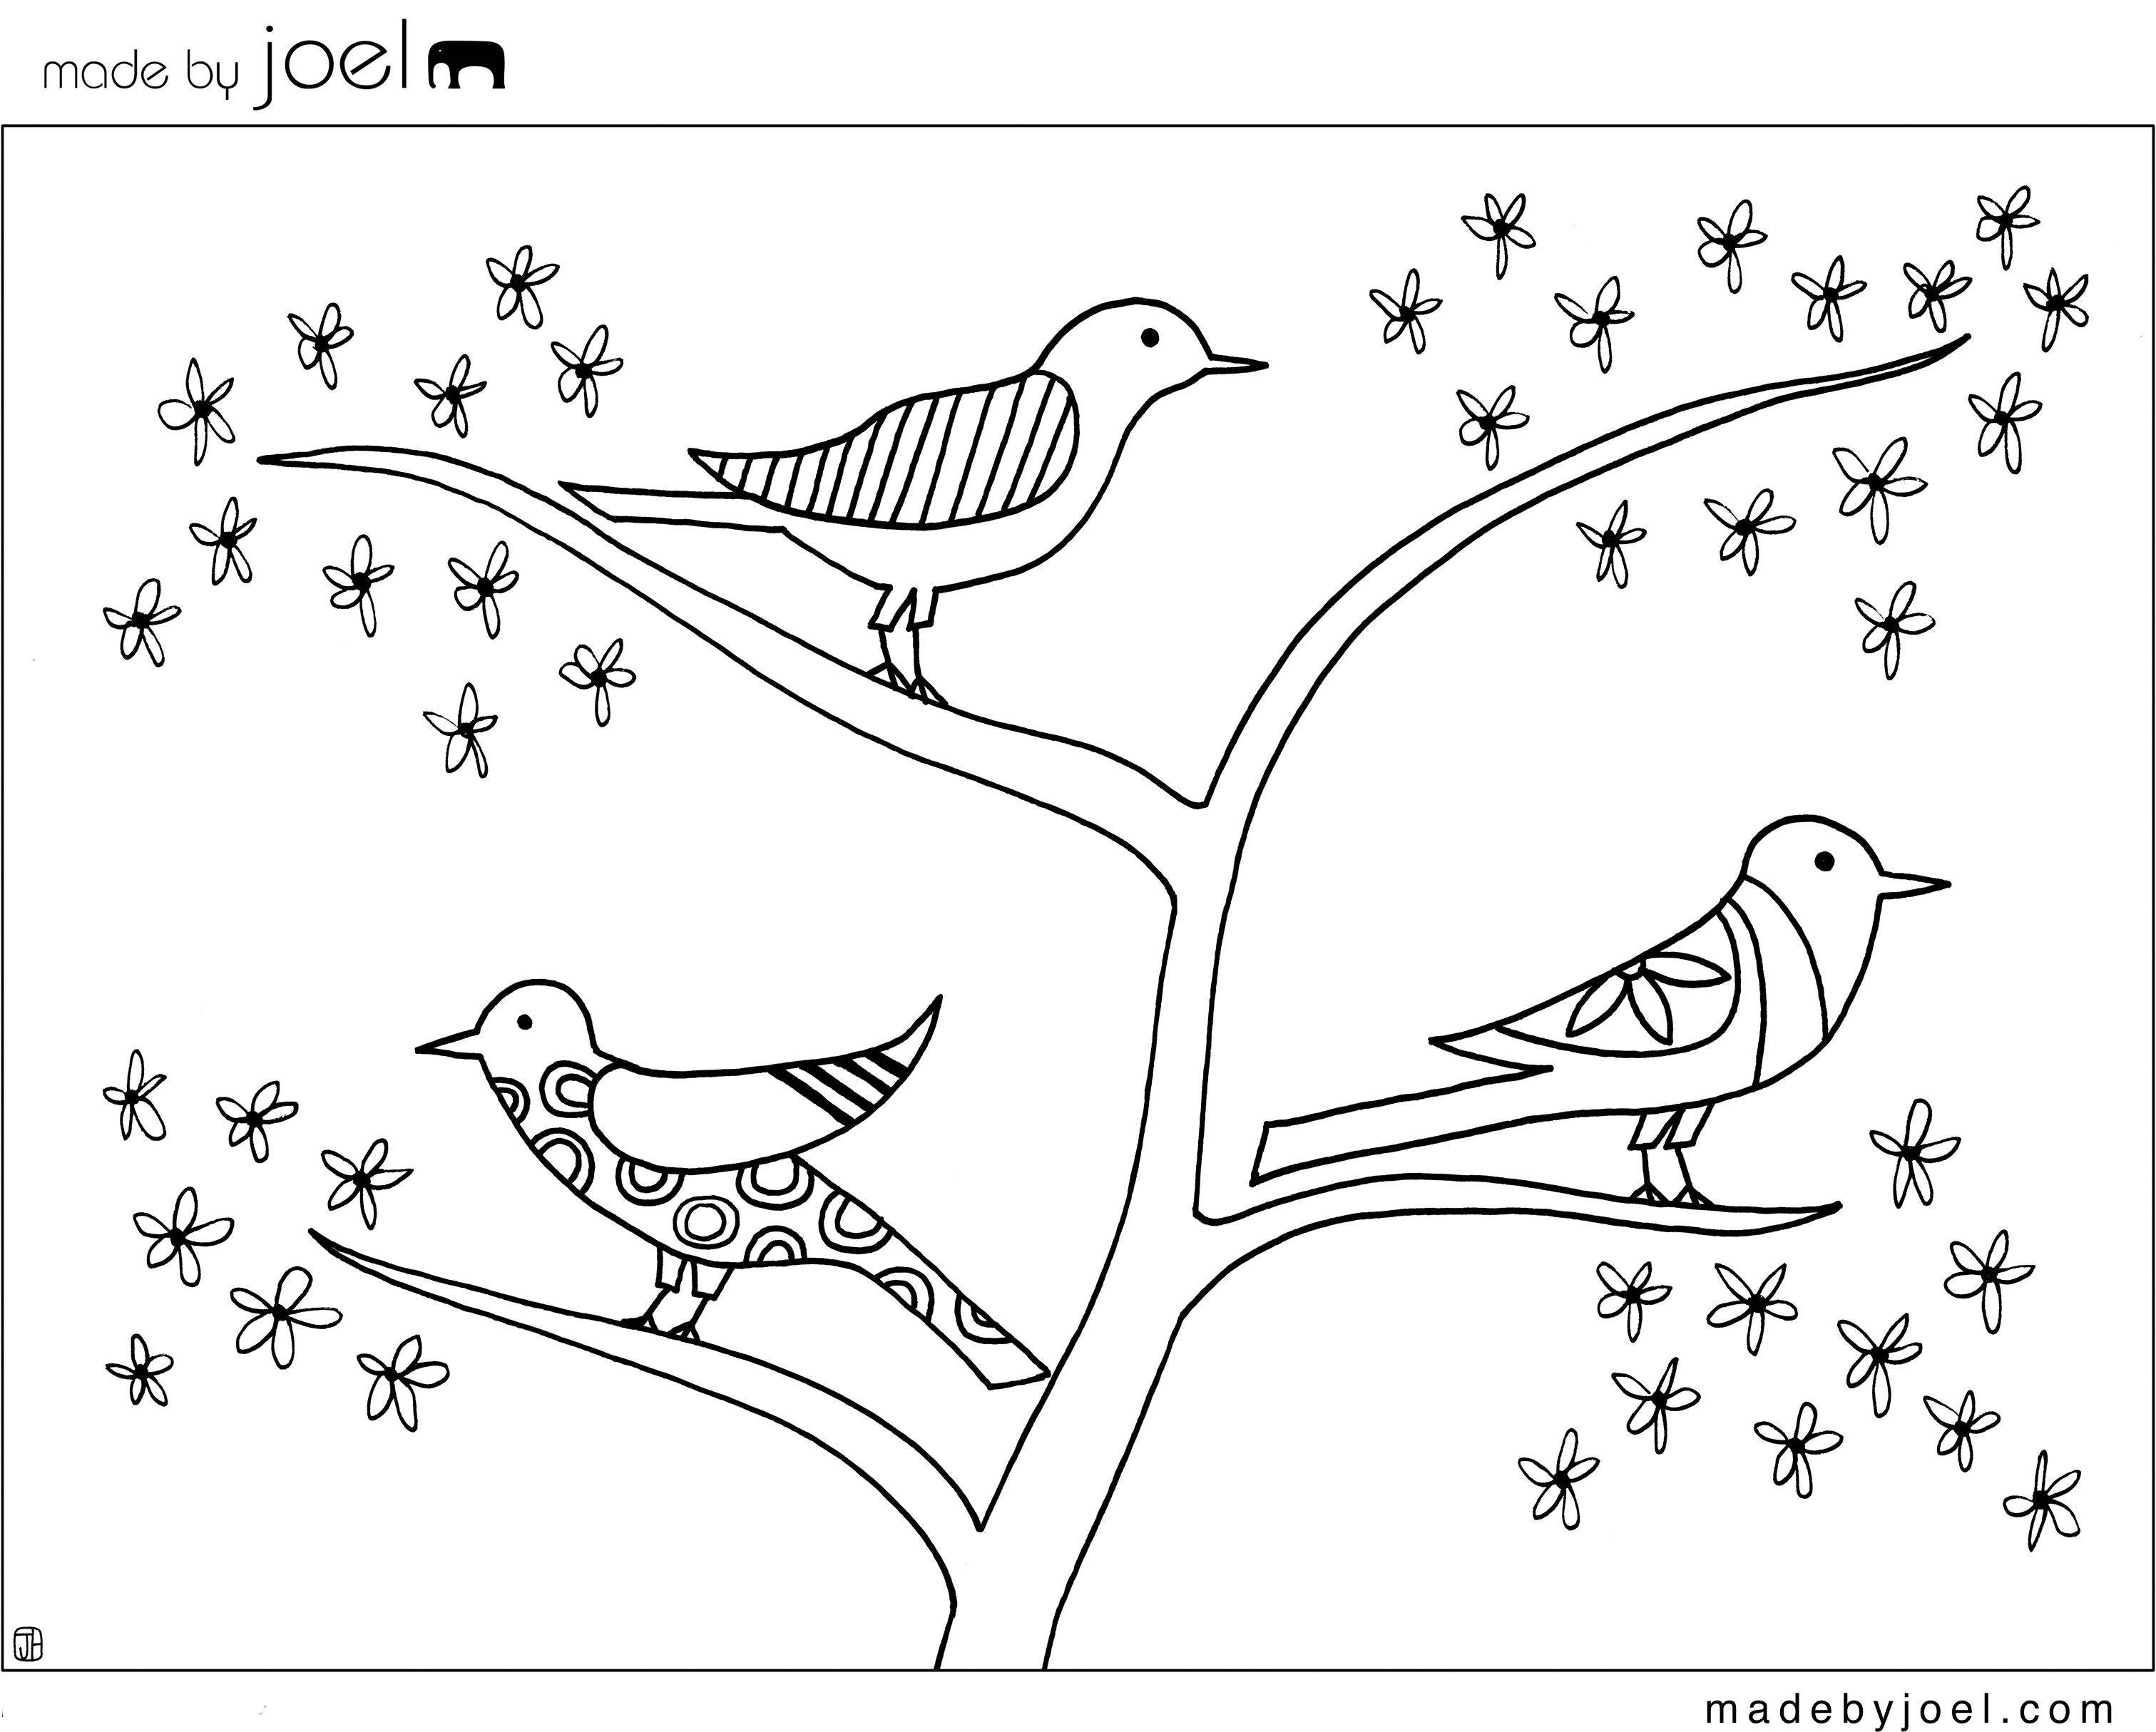 images of birds for coloring book pages - photo #22